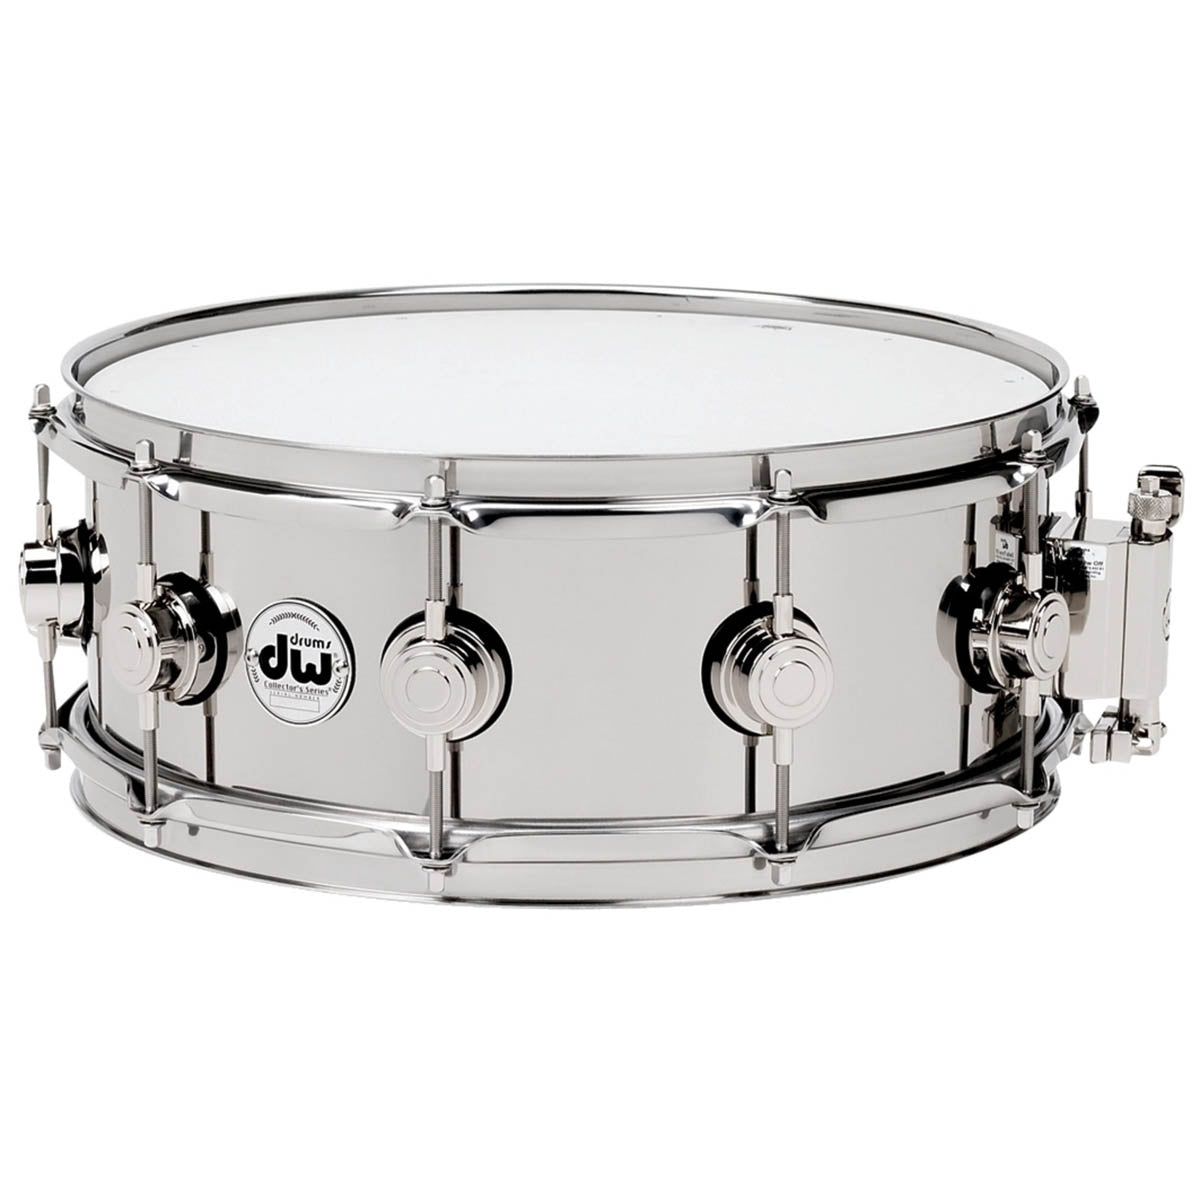 DW Collector's Series 14"x6.5" Stainless Steel Snare